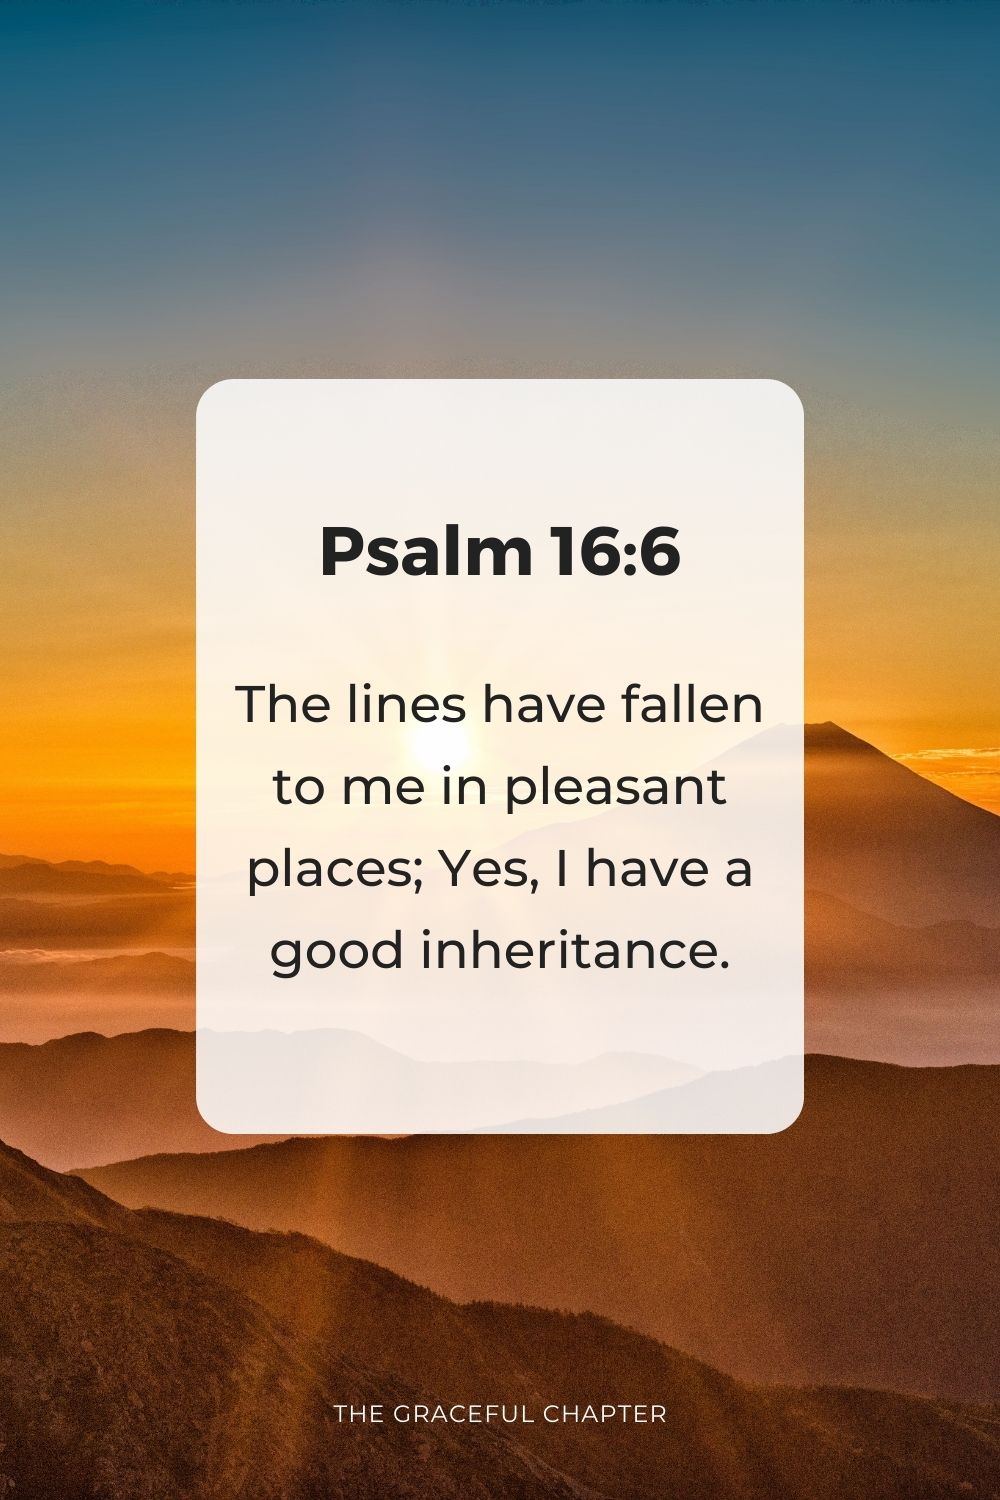 The lines have fallen to me in pleasant places; Yes, I have a good inheritance.